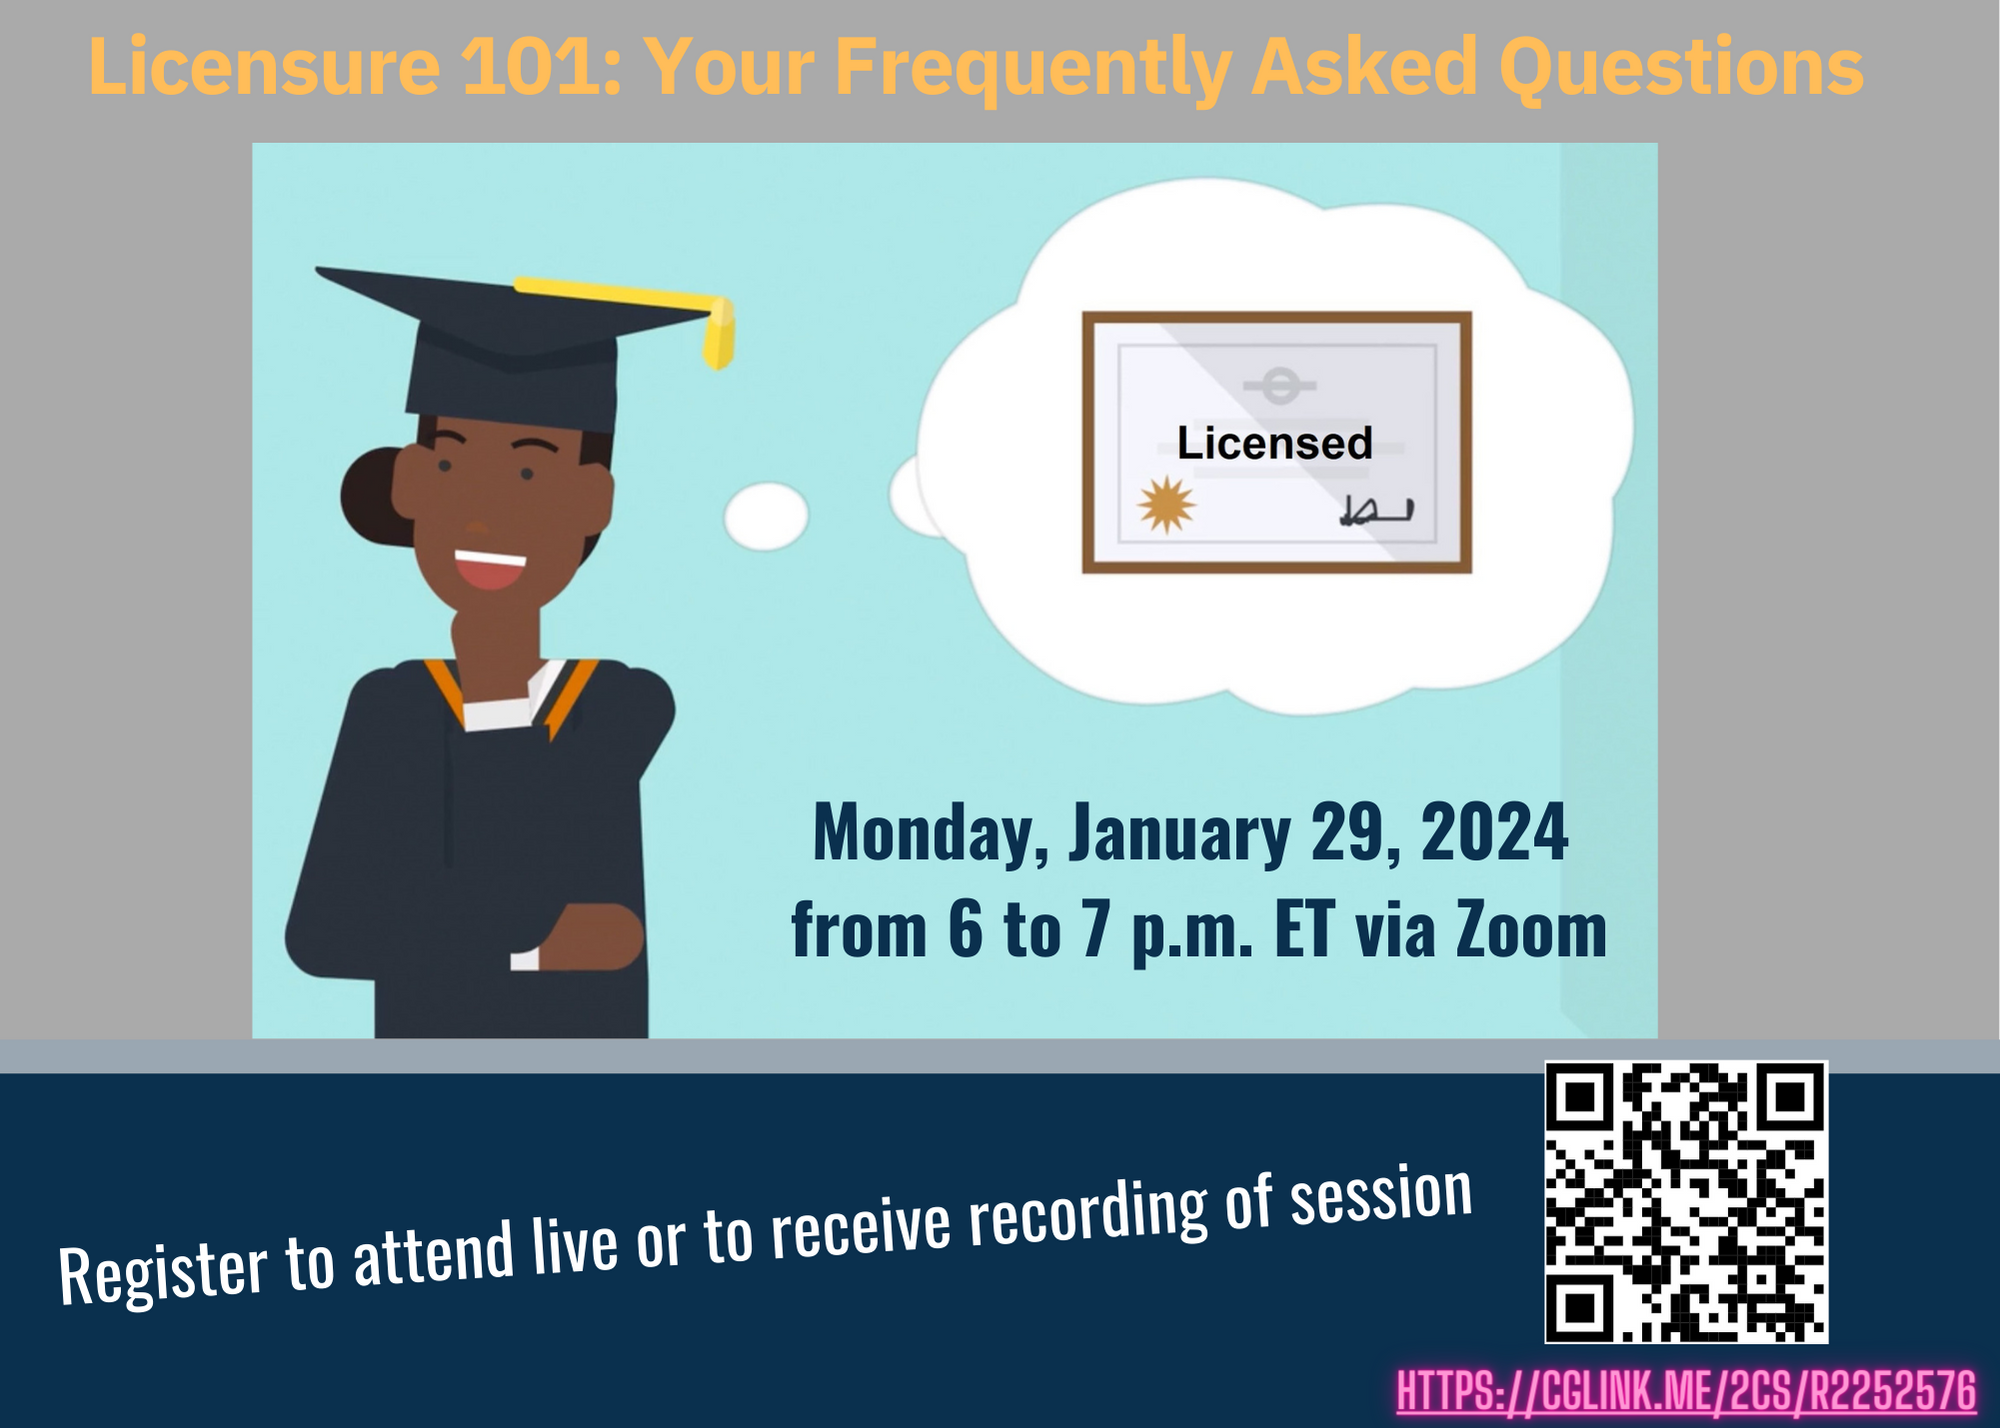 Licensure 101: Your Frequently Asked Questions graphic poster